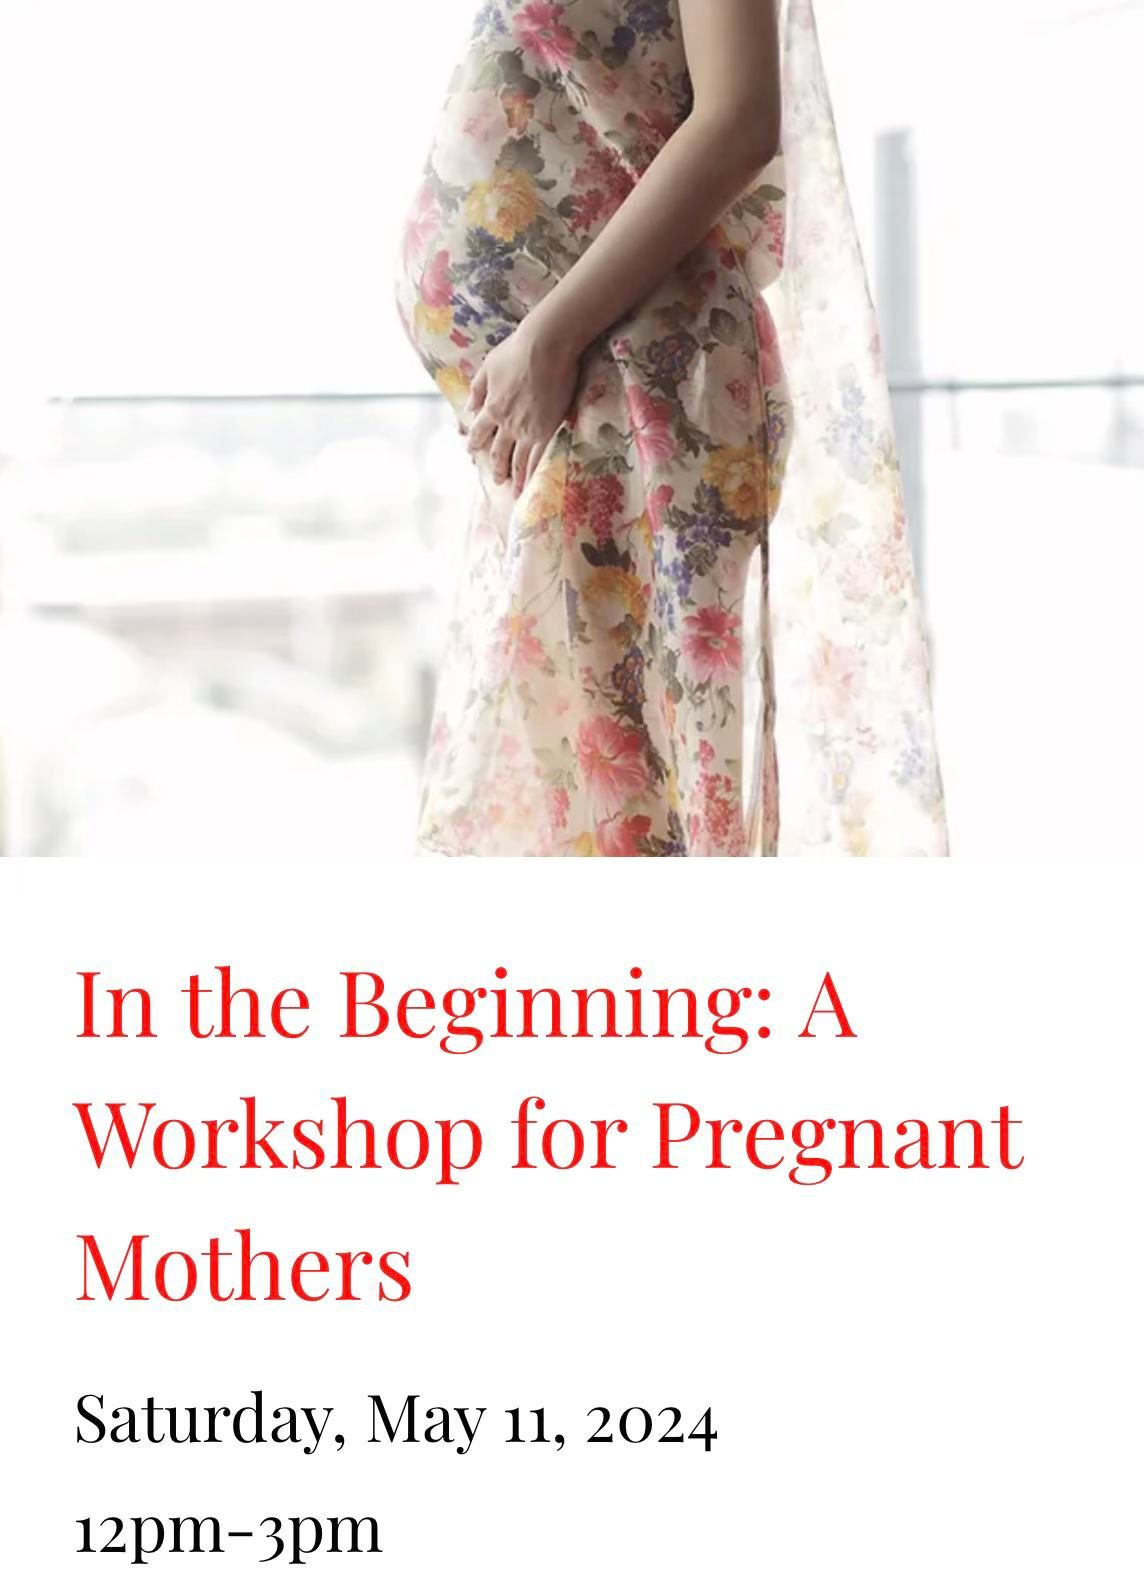 In the Beginning: A Workshop for Pregnant Mothers